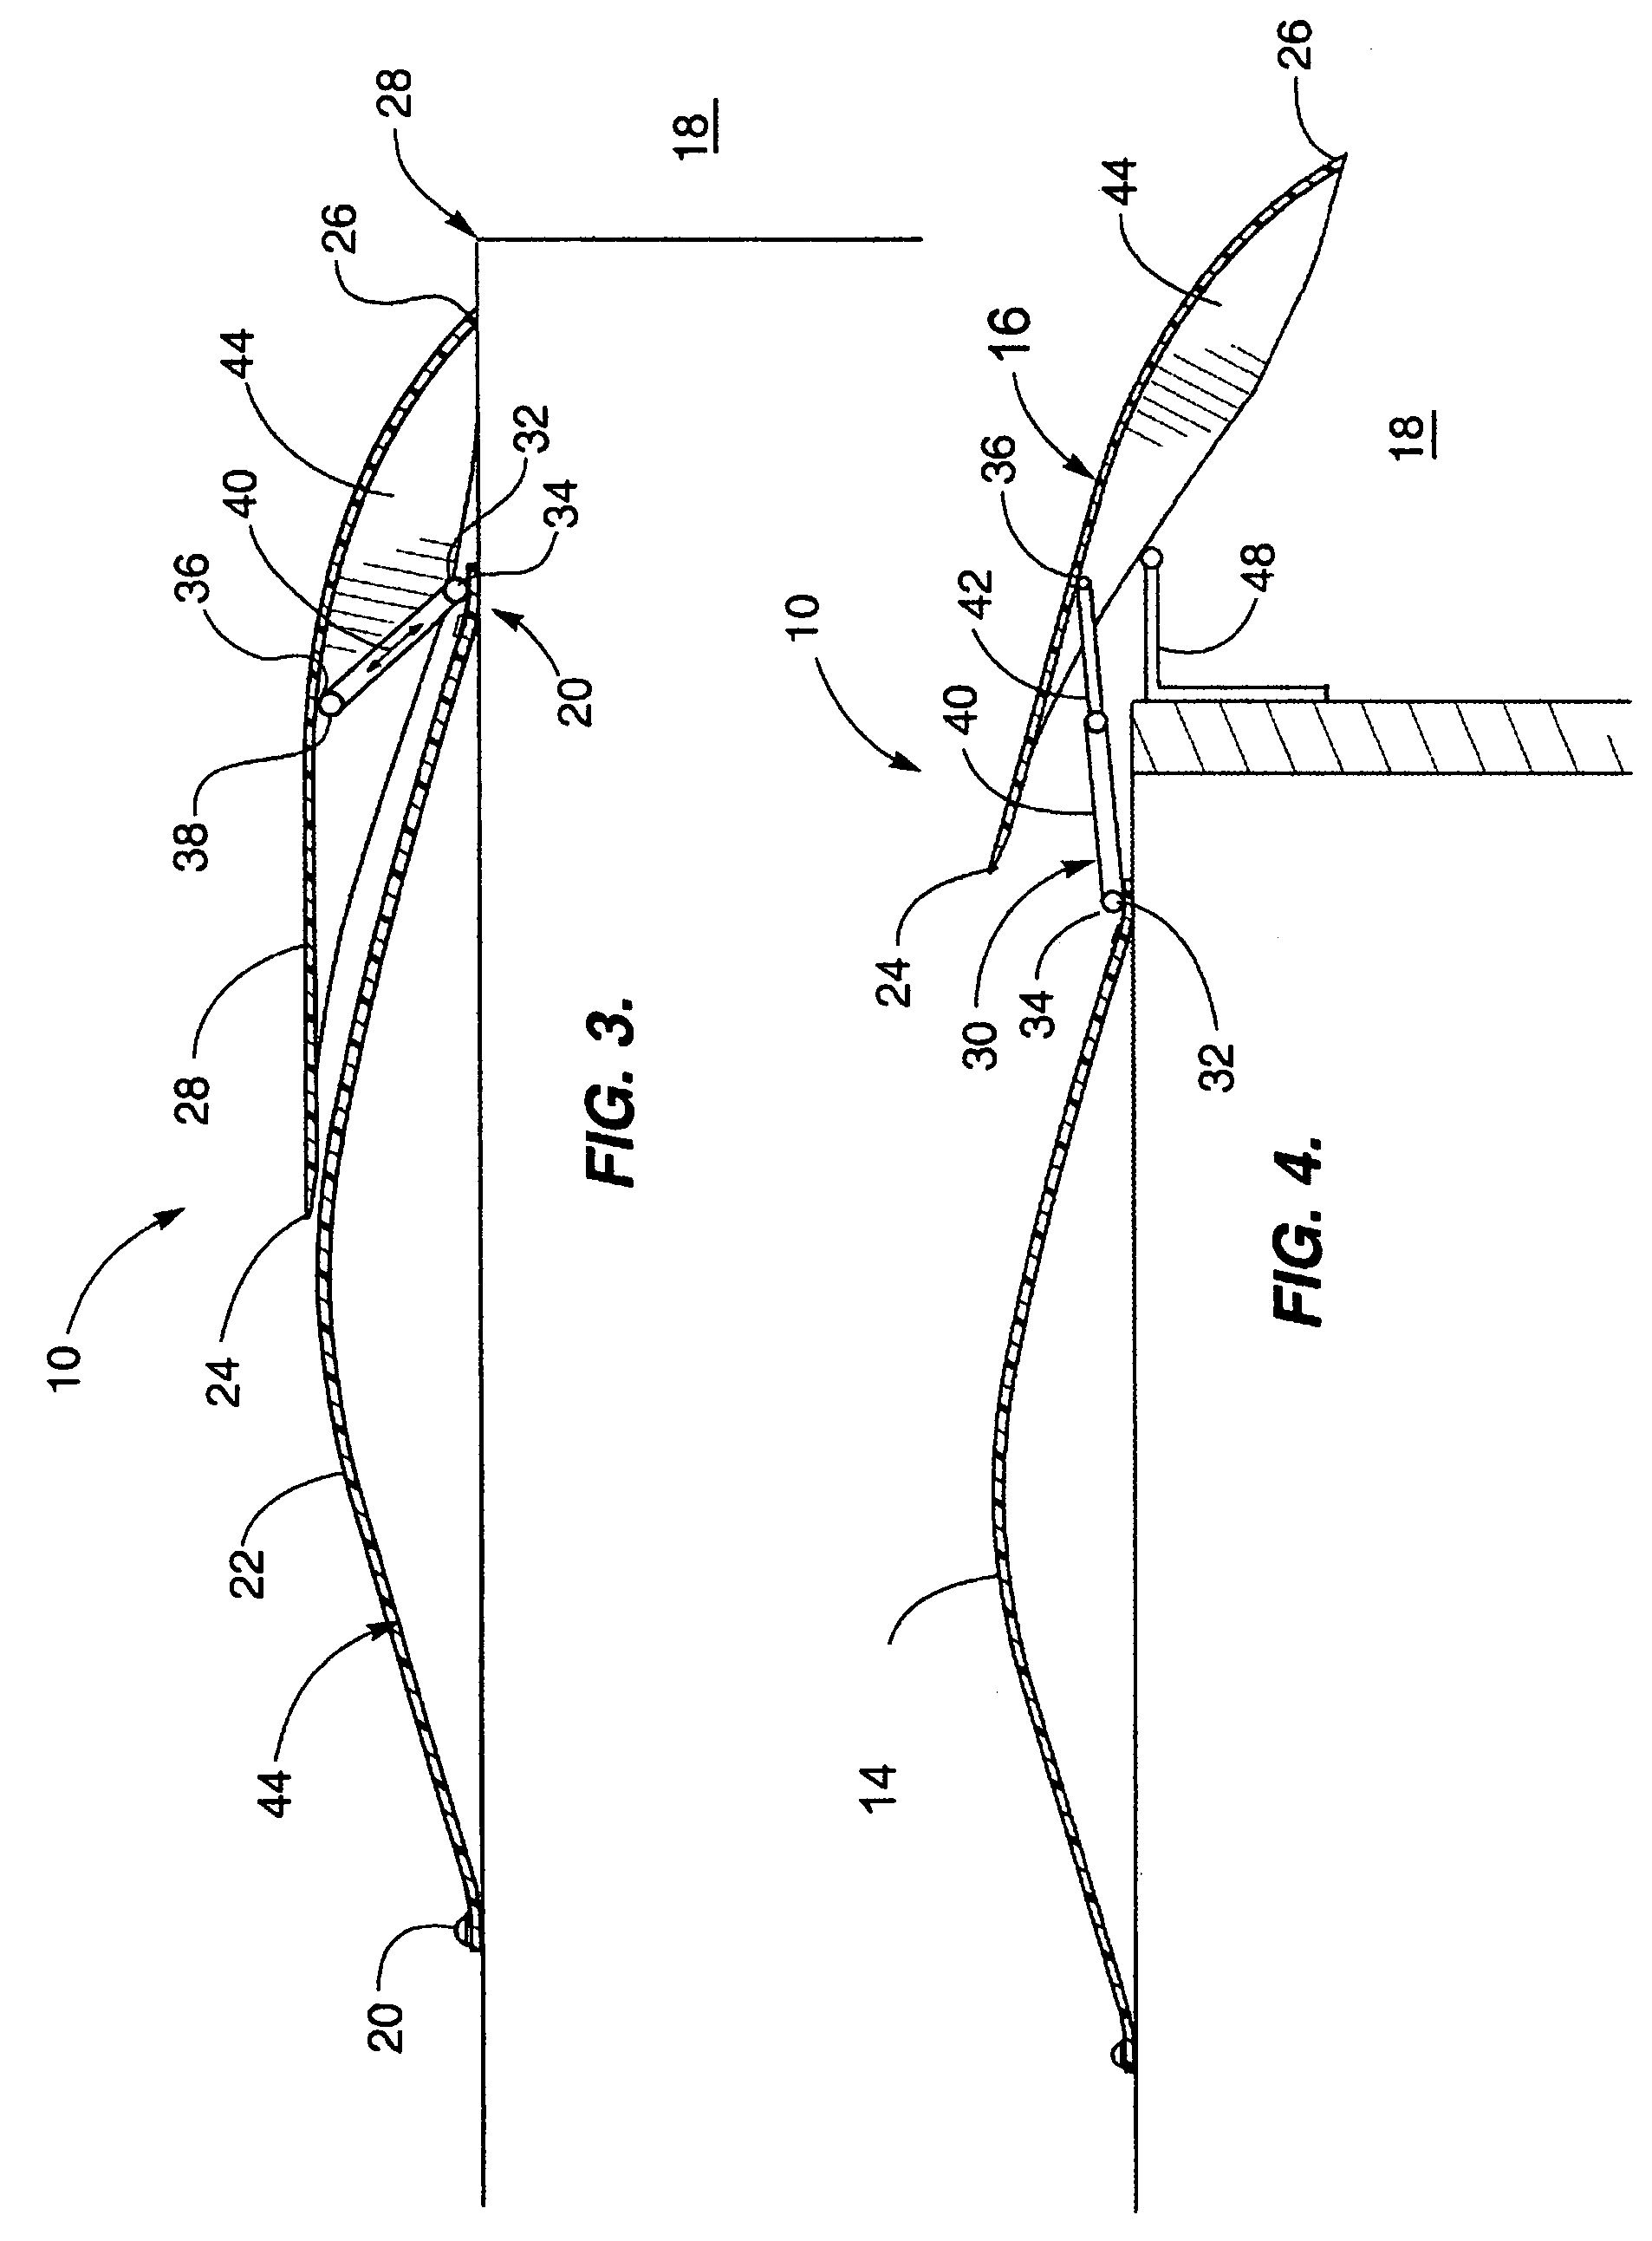 Apparatus for reducing drag on vehicles